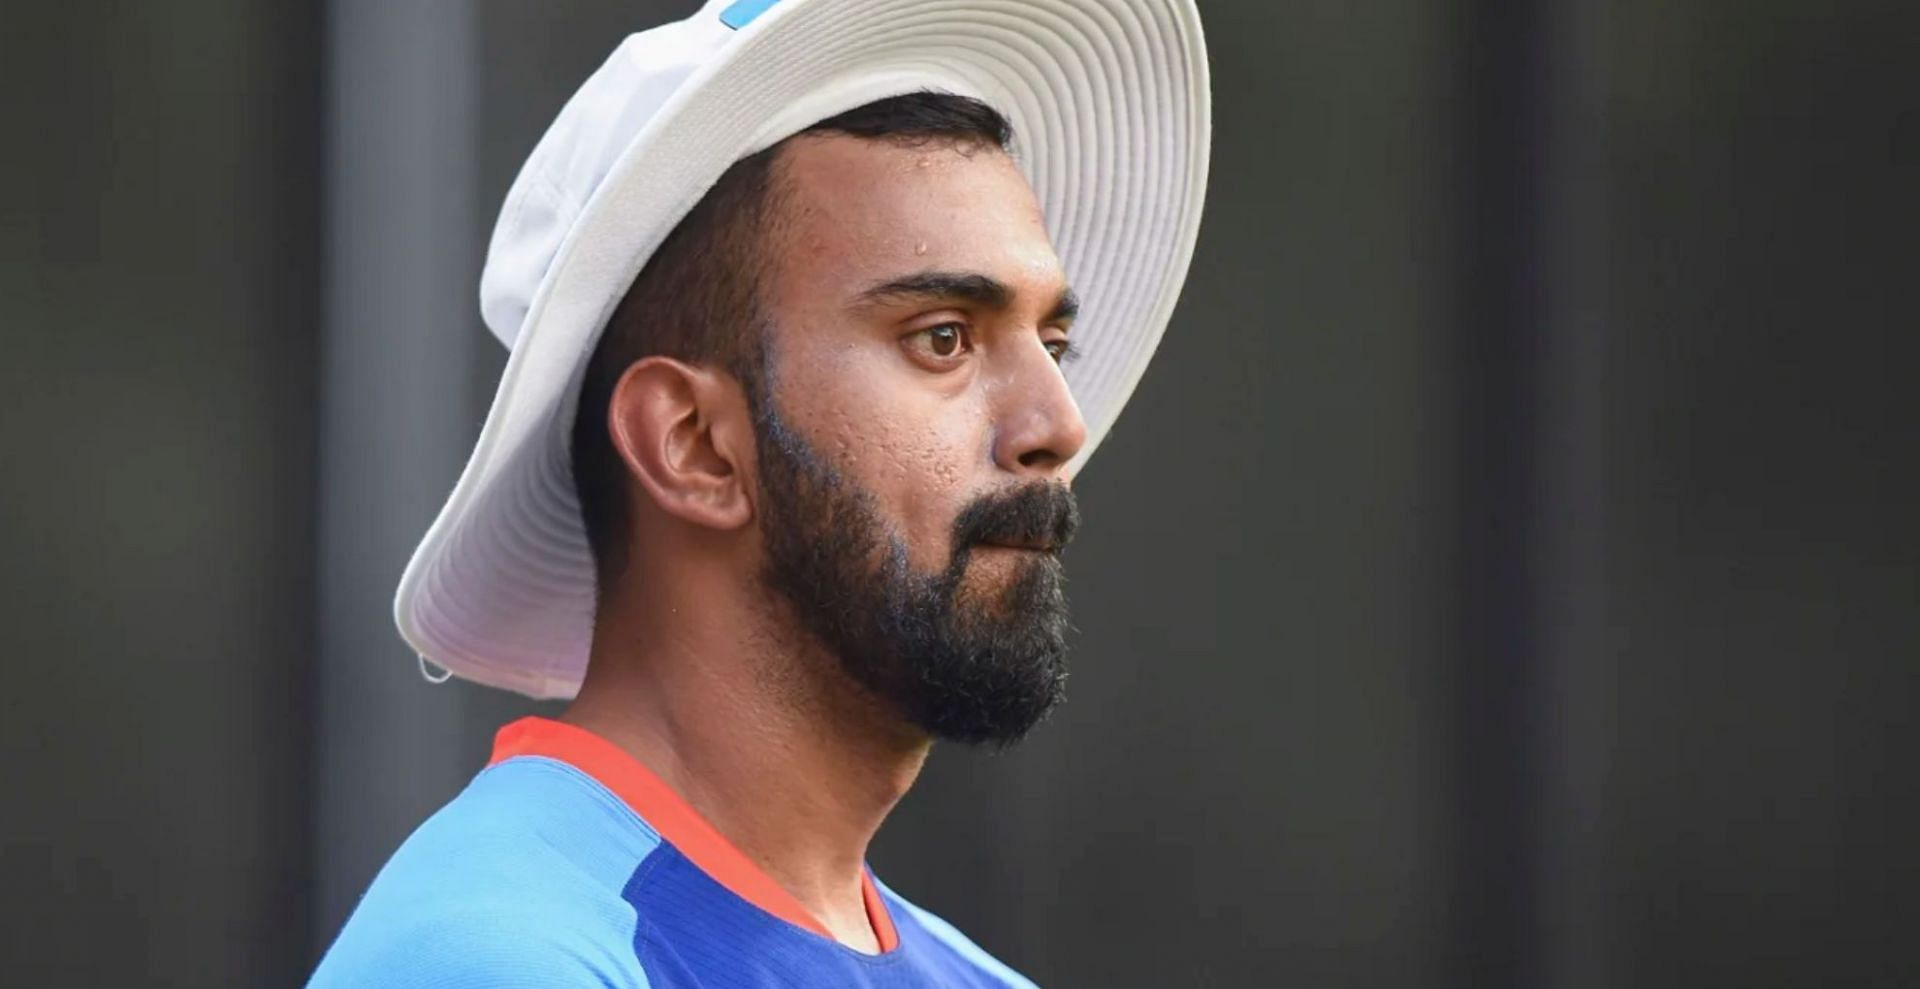 KL Rahul has struggled with frequent injuries in recent times (Credit: Twitter)